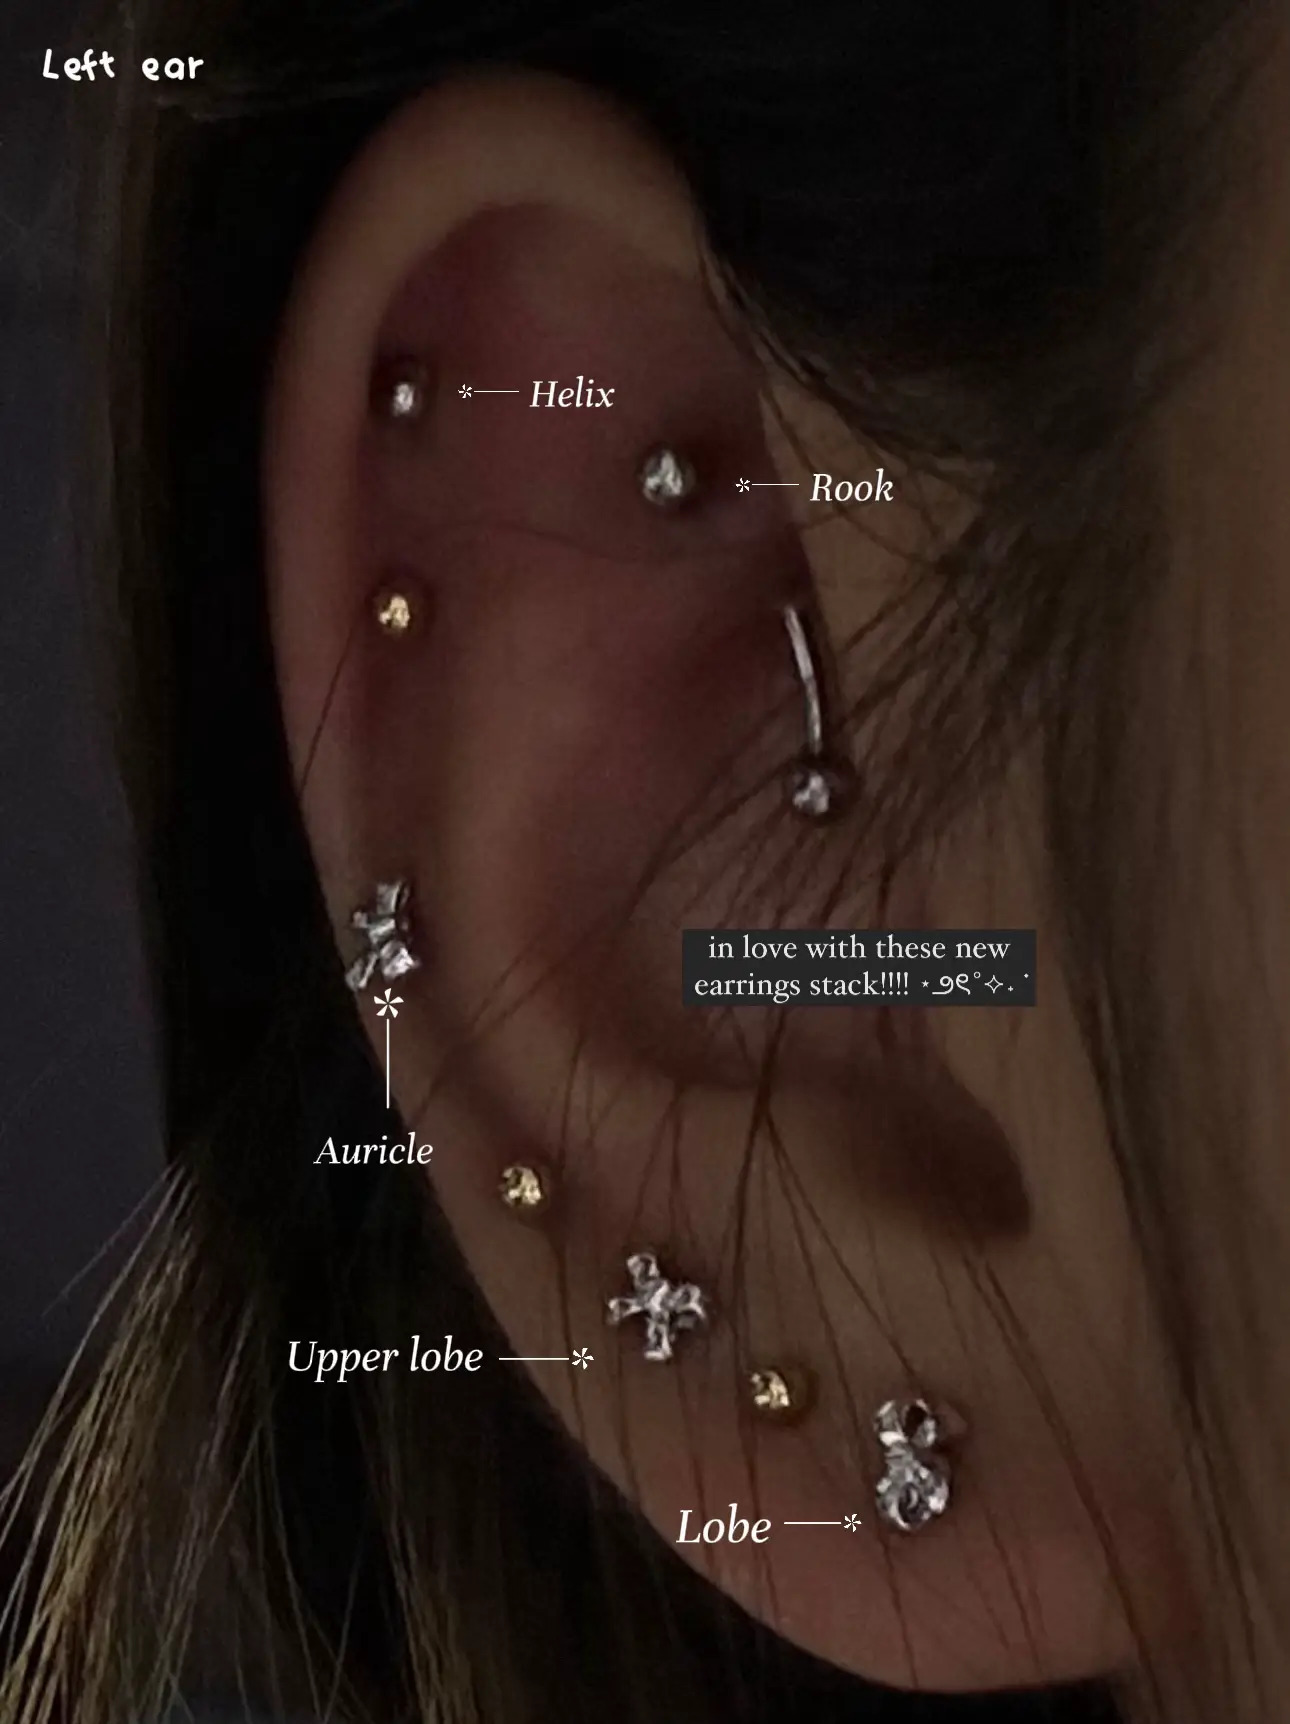 Looking for new piercing ideas! Both ears are pretty similar. “Star” side  is a flat piercing up top and “Moon” side is a helix. I've considered  getting either a forward helix or